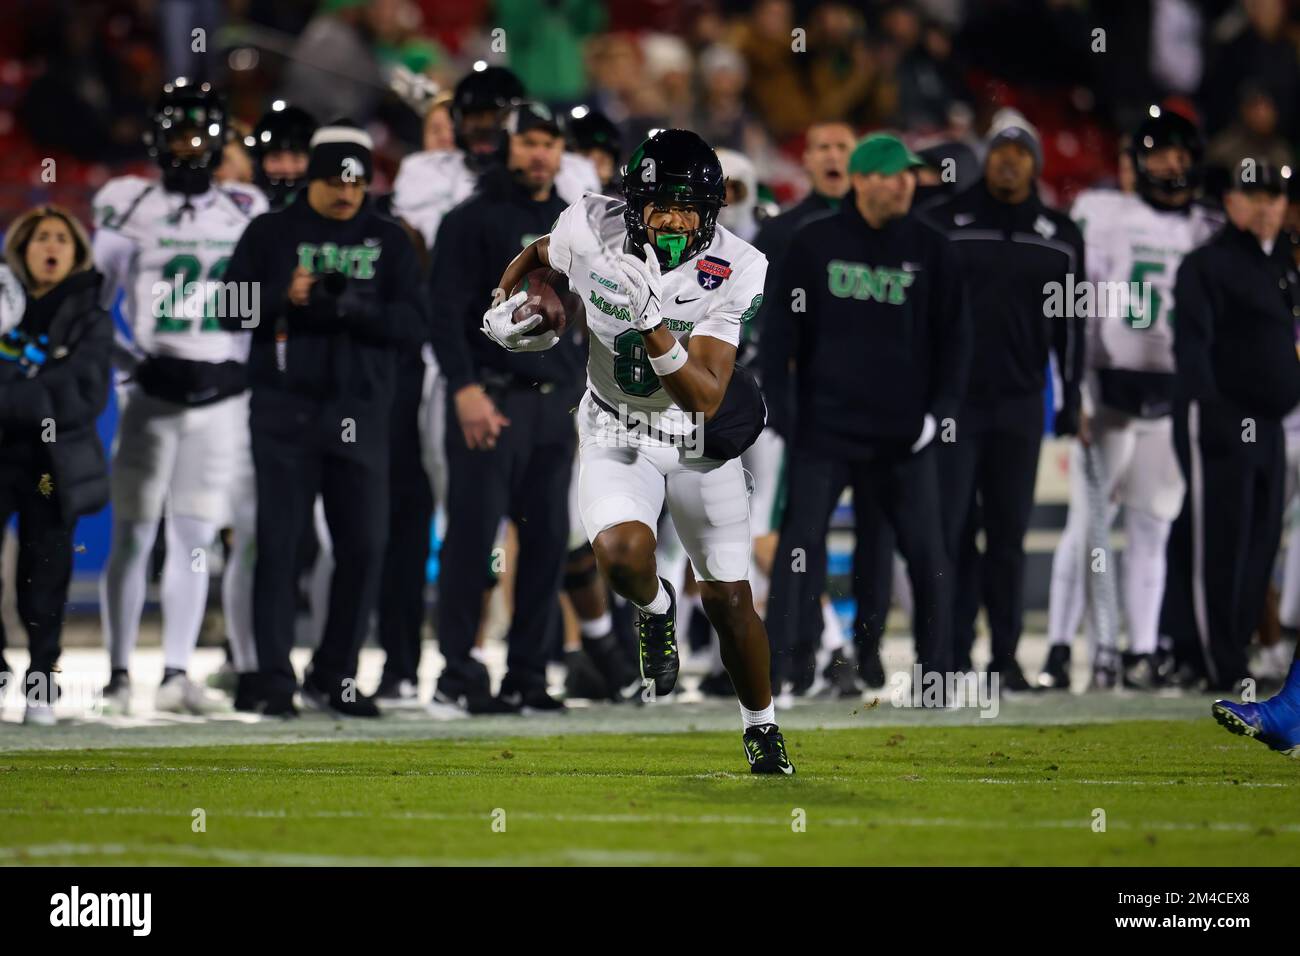 North Texas Mean Green wide receiver Damon Ward Jr. (8) makes a 40-yard catch during the 1st quarter of the 2022 Frisco Bowl college football game, at Stock Photo